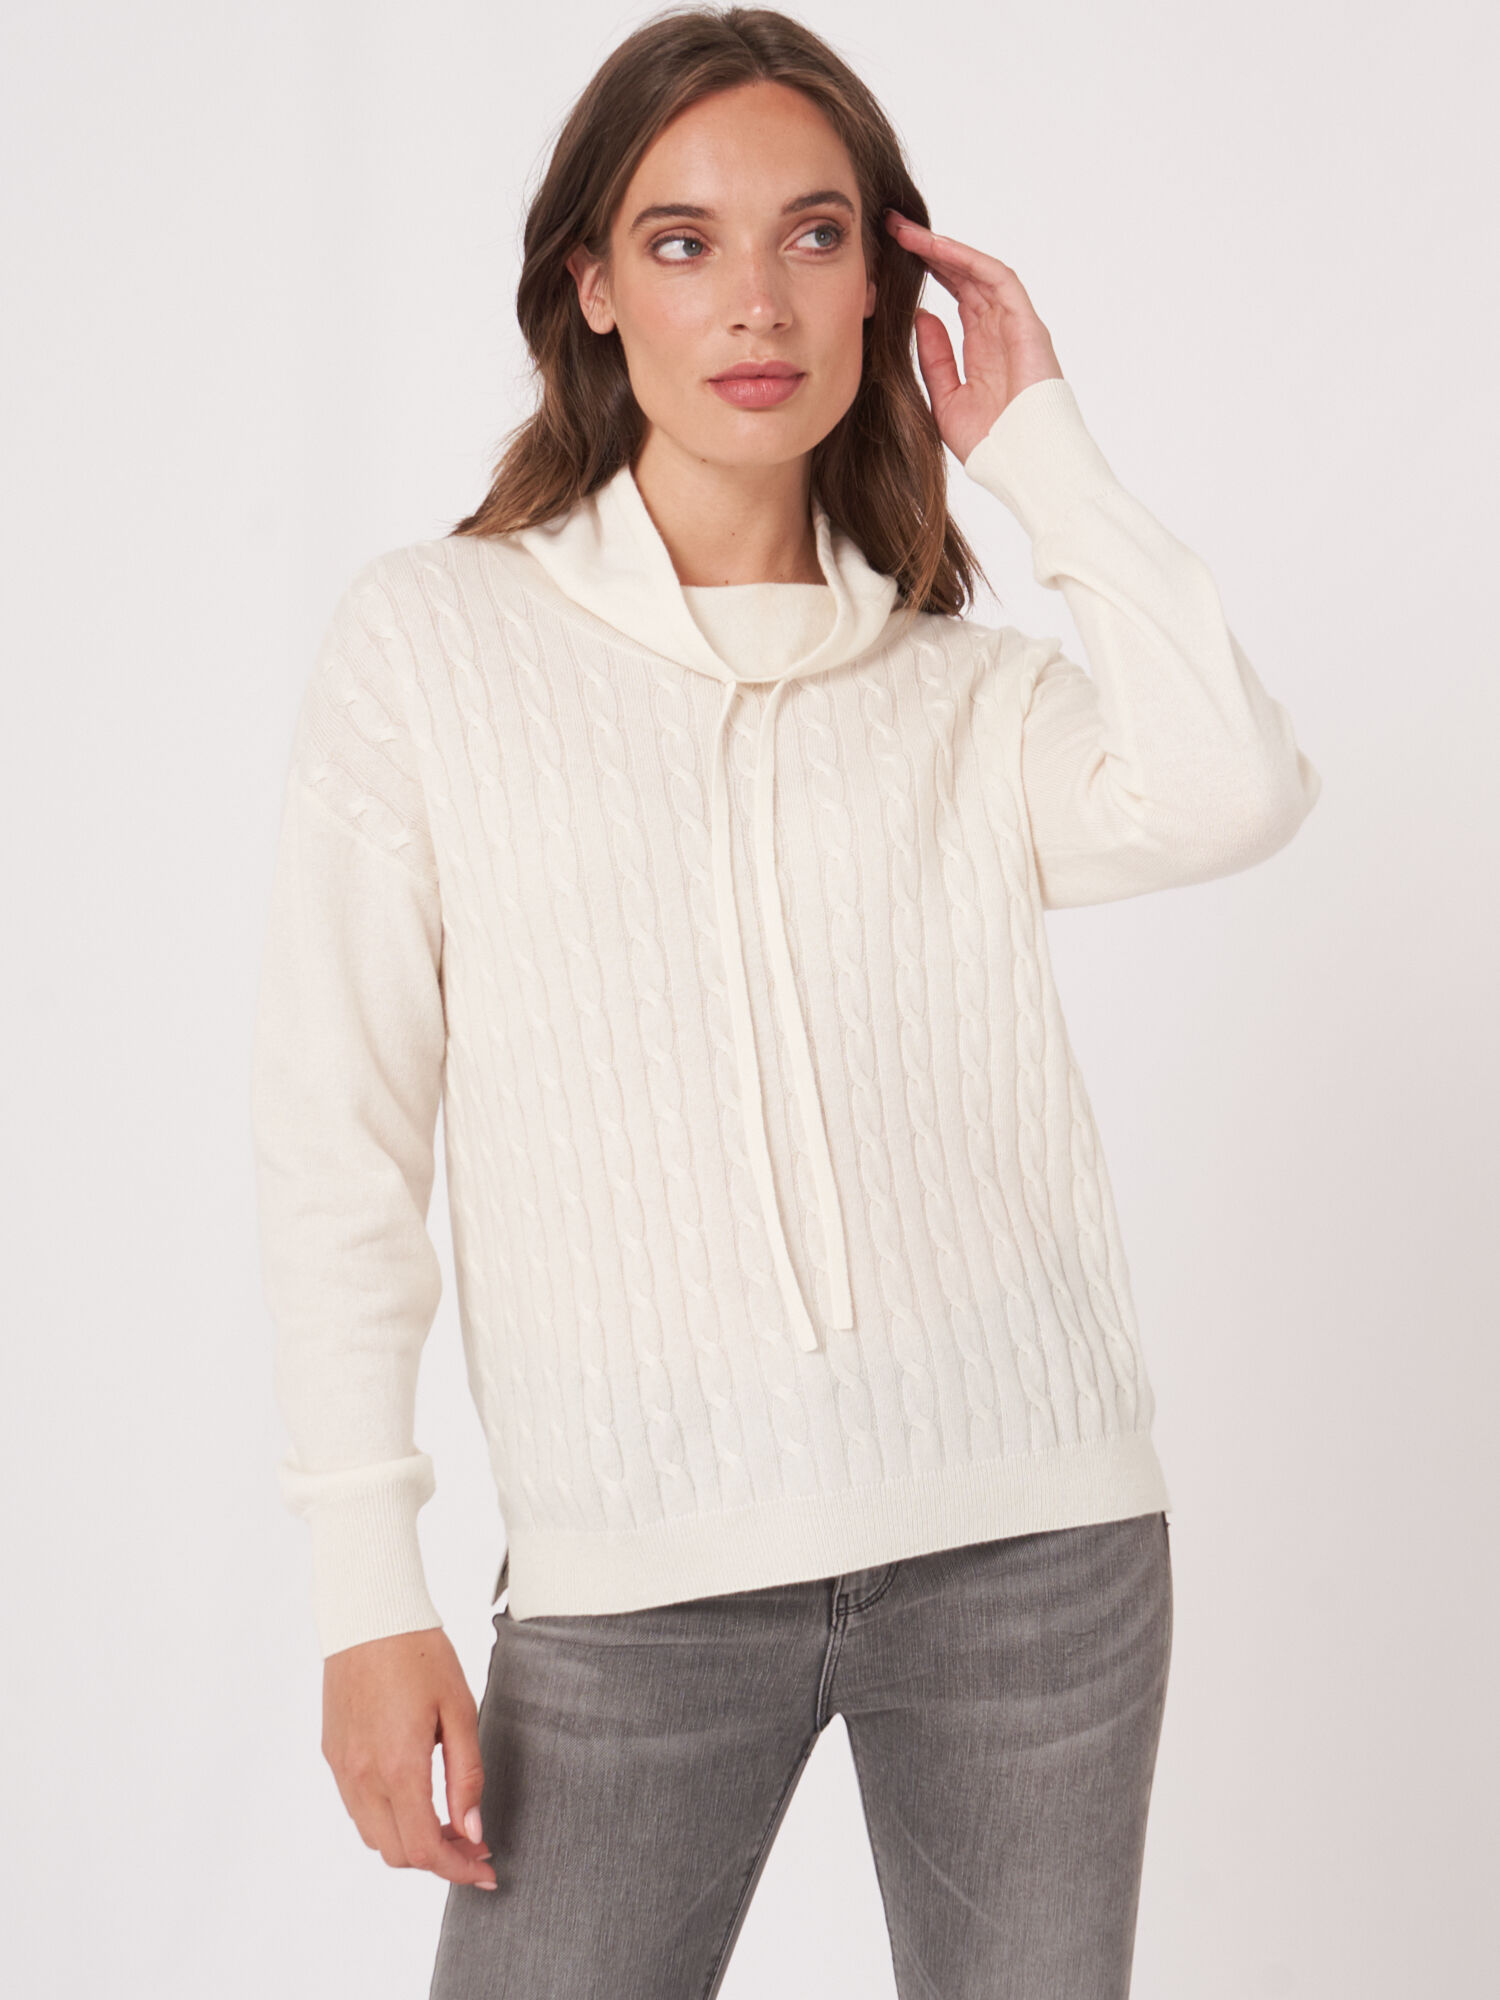 Women's Cable knit sweater with stand-up collar and drawstring